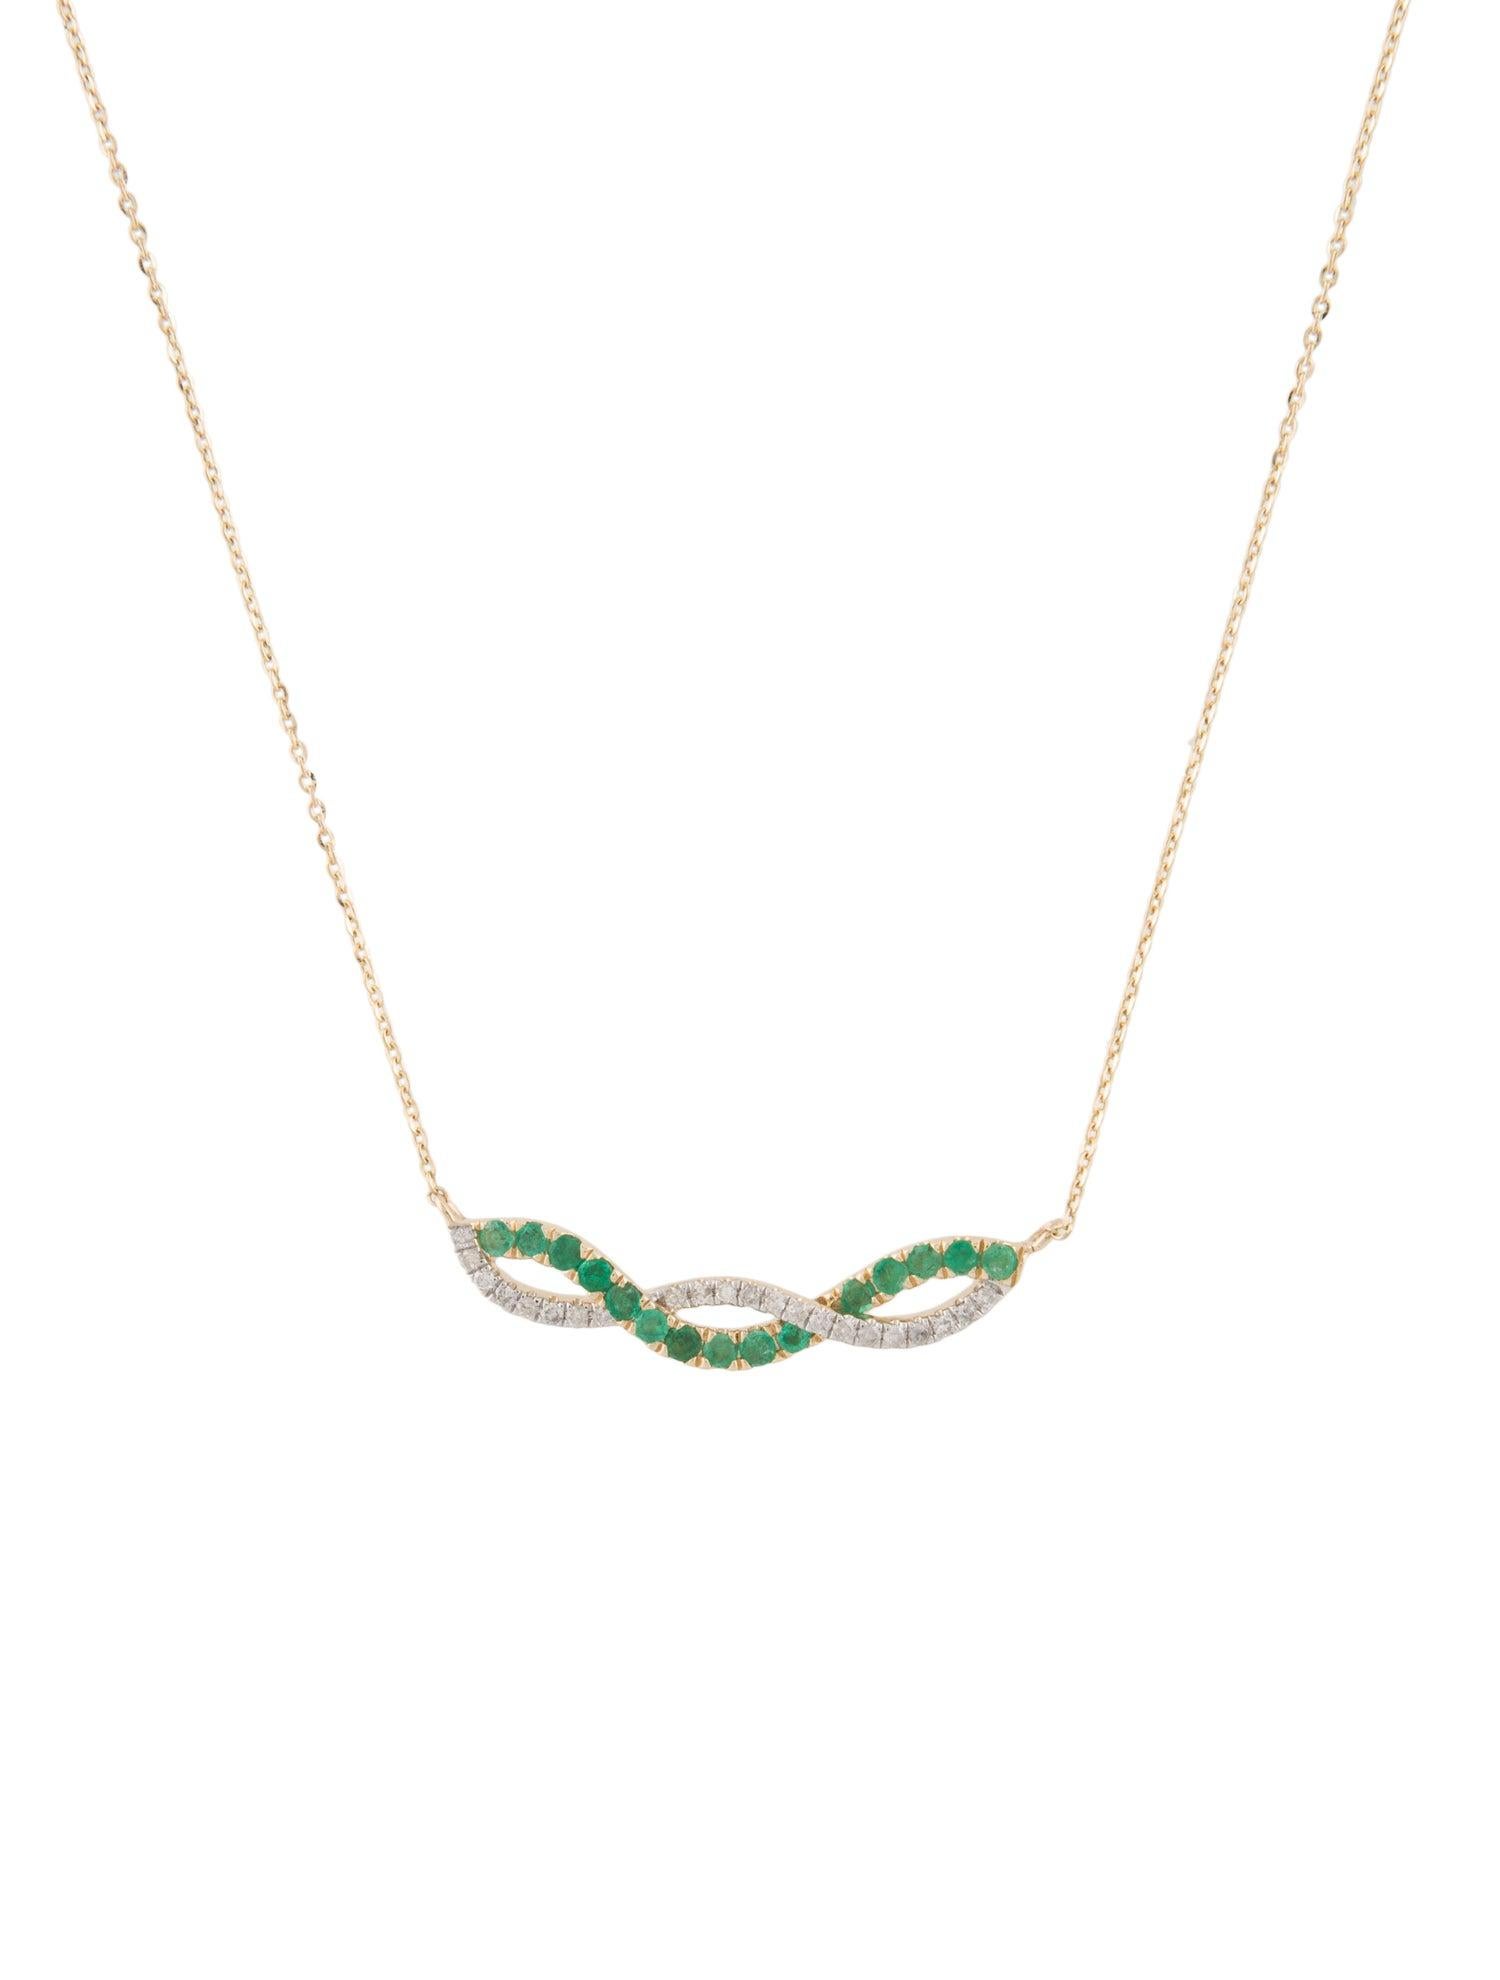 Immerse yourself in the mesmerizing allure of nature with our Forest Ferns collection. This exquisite necklace, part of our Forest Ferns line, is a tribute to the lush, verdant forests that grace our world.

Crafted with meticulous artistry, it